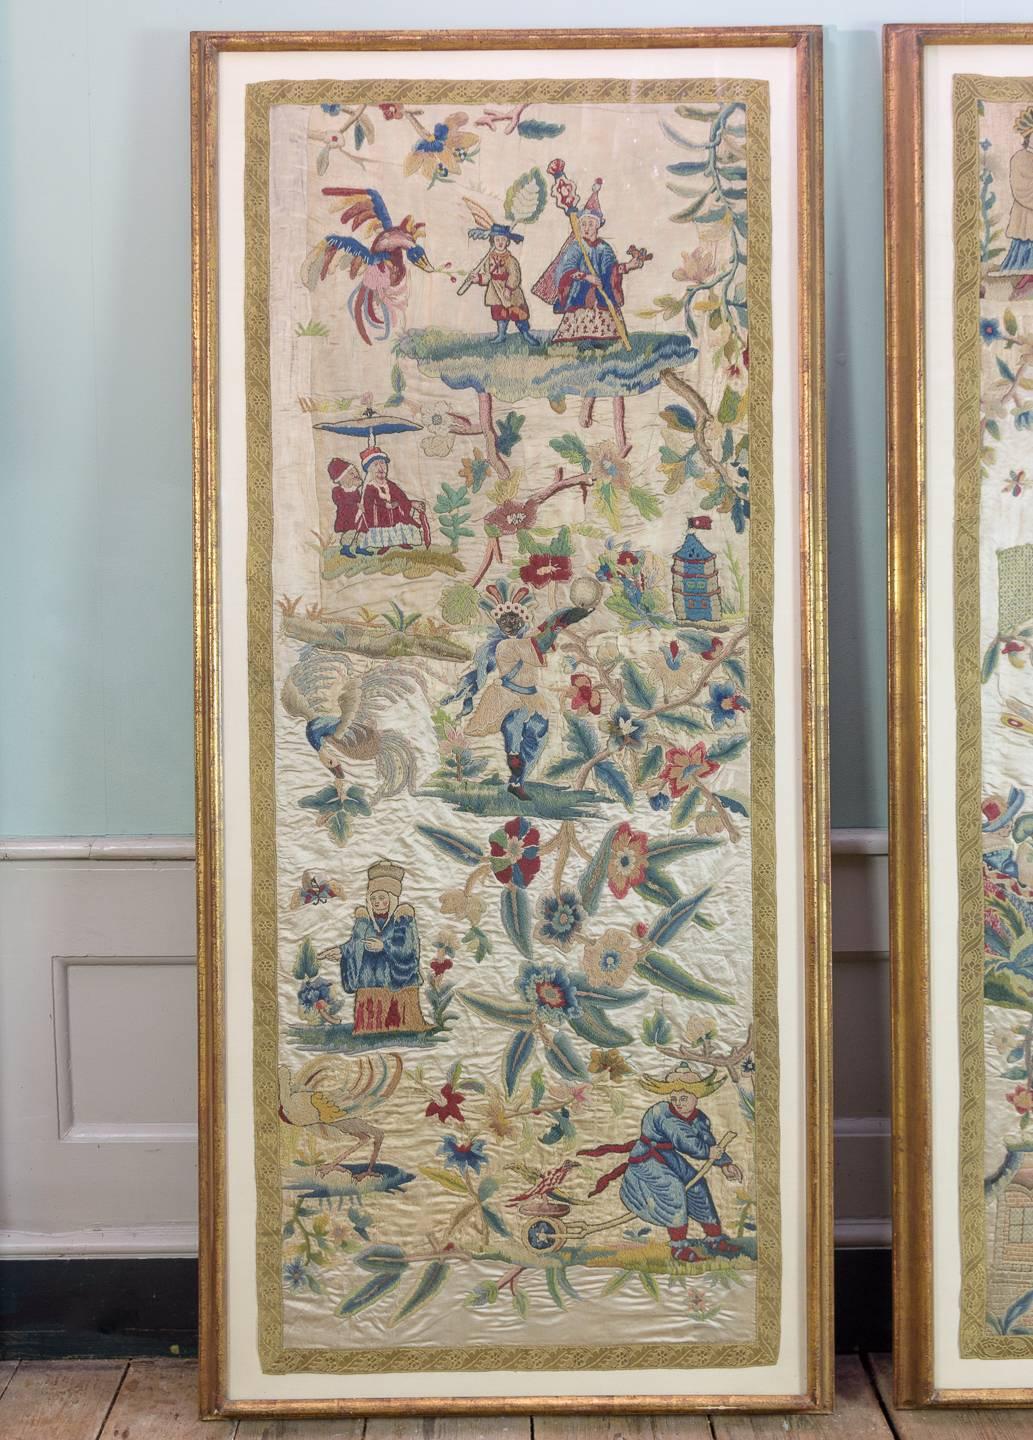 Two English crewel panels, 19th century in the late 17th or early 18th century manner, each silk panel with wool work embroidered decoration and gold braided border, most likely originally part of tester bed drapery, in later gilt frames, with